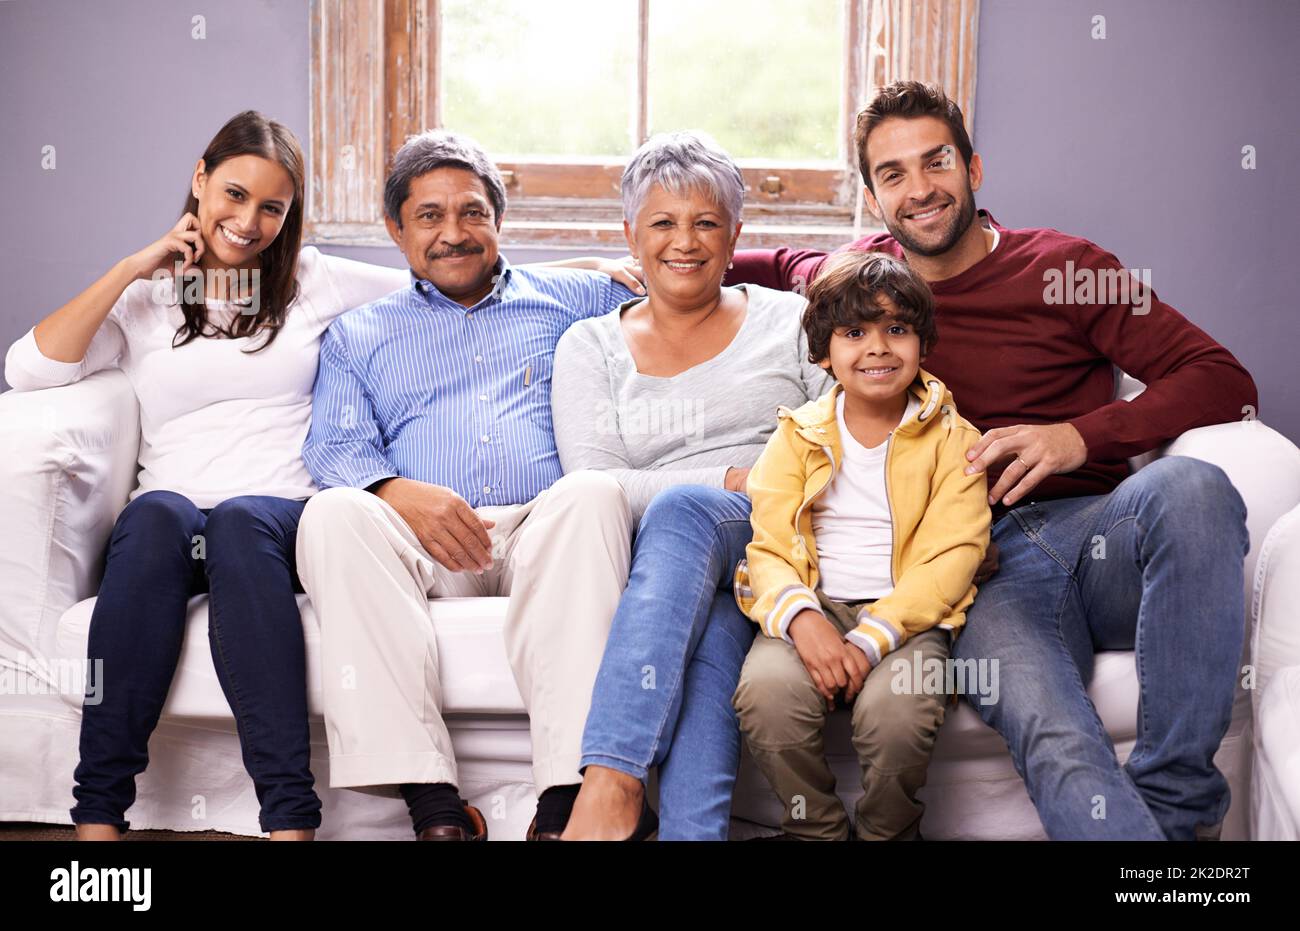 A special family moment. Portrait of a family bonding together in the living room. Stock Photo